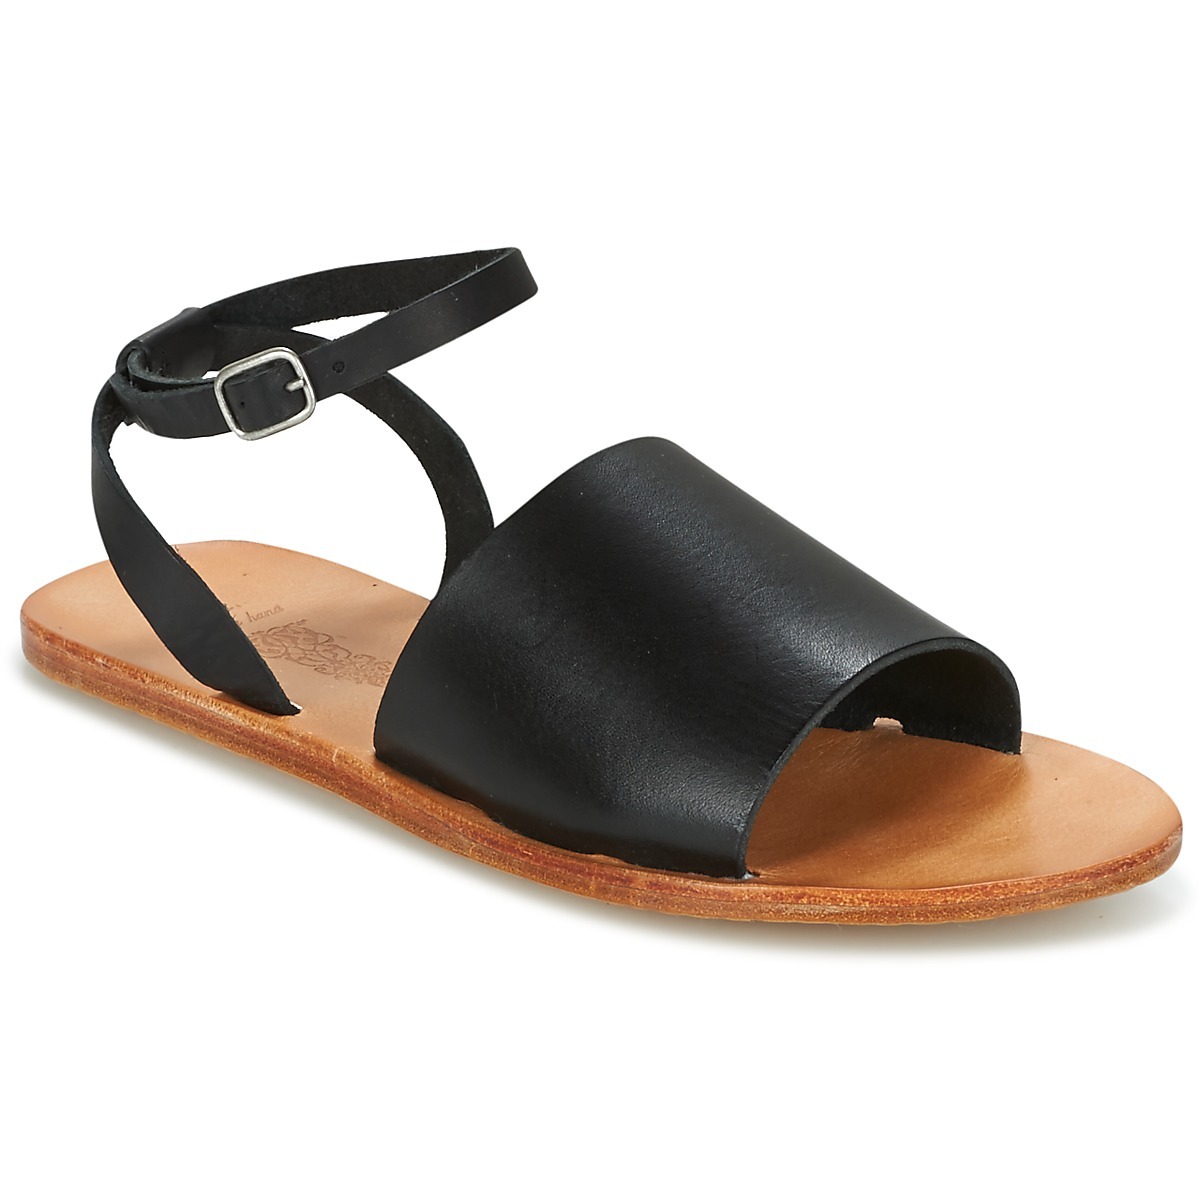 N.D.C. - Woman Sandals Black from Spartoo GOOFASH